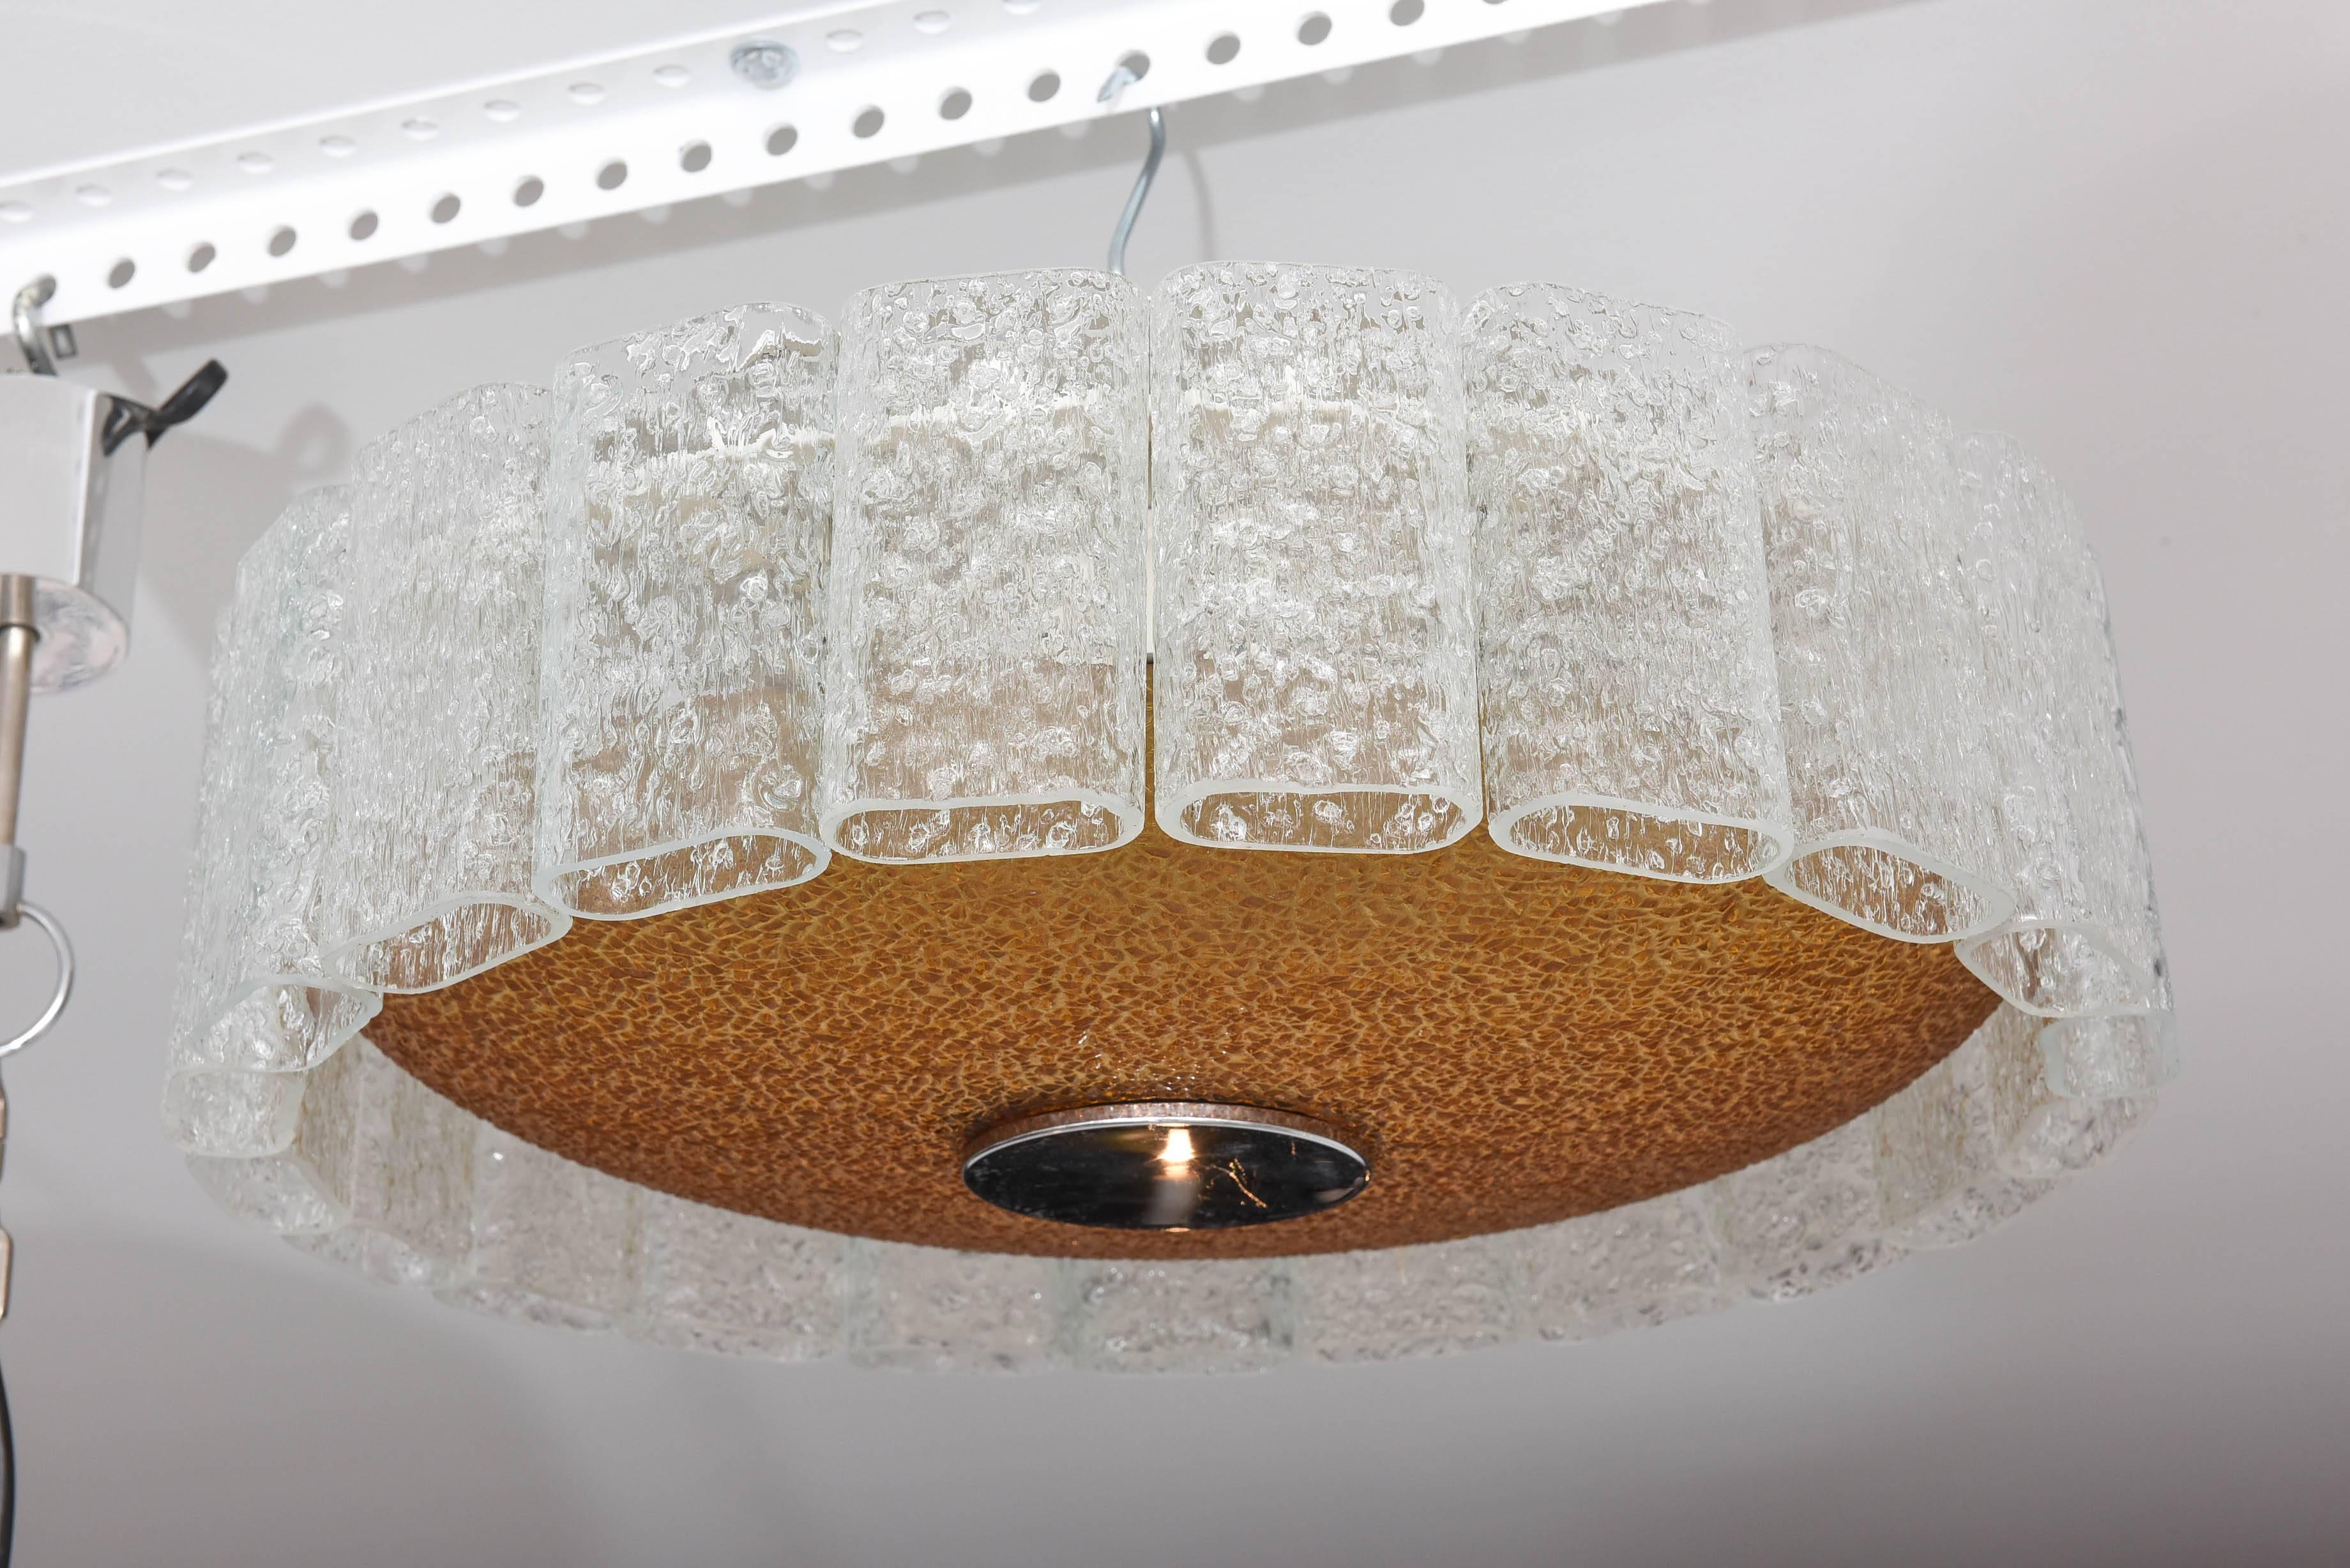 This amazing fixture was created by the iconic firm Doria Leuchten in the 1960s.  The circular central disc is in a amber/gold color eisglas with a polished chrome fitting. There are twenty-one molded prisms in clear eisglas.

Note:  The piece